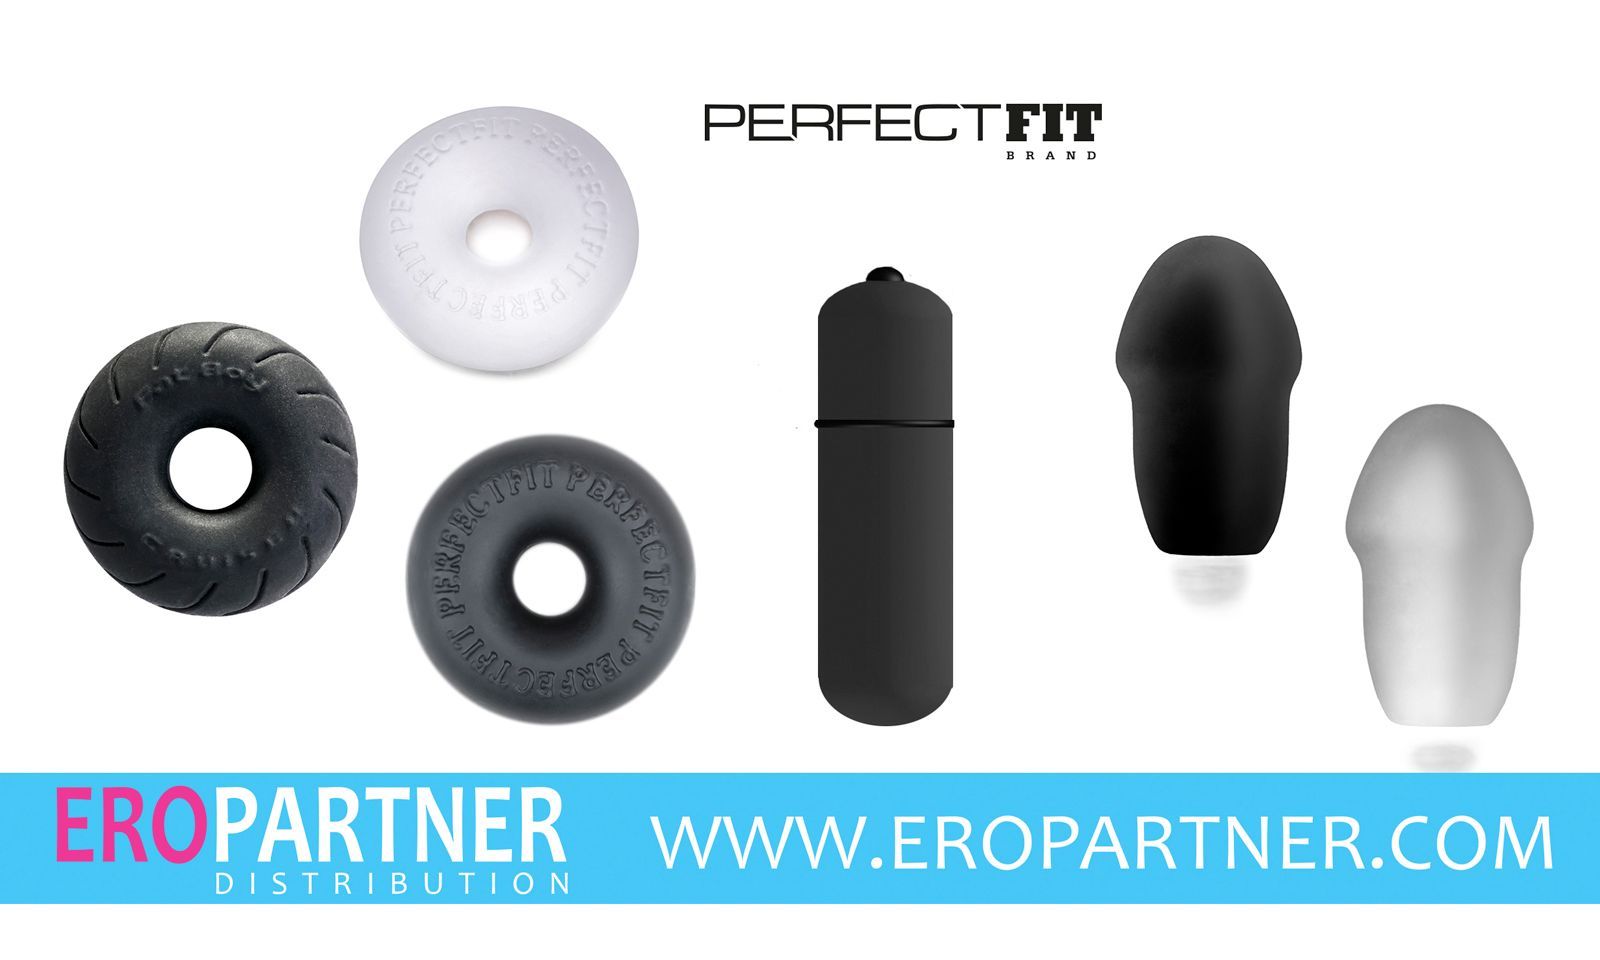 Eropartner Adds Perfect Fit Items To Inventory